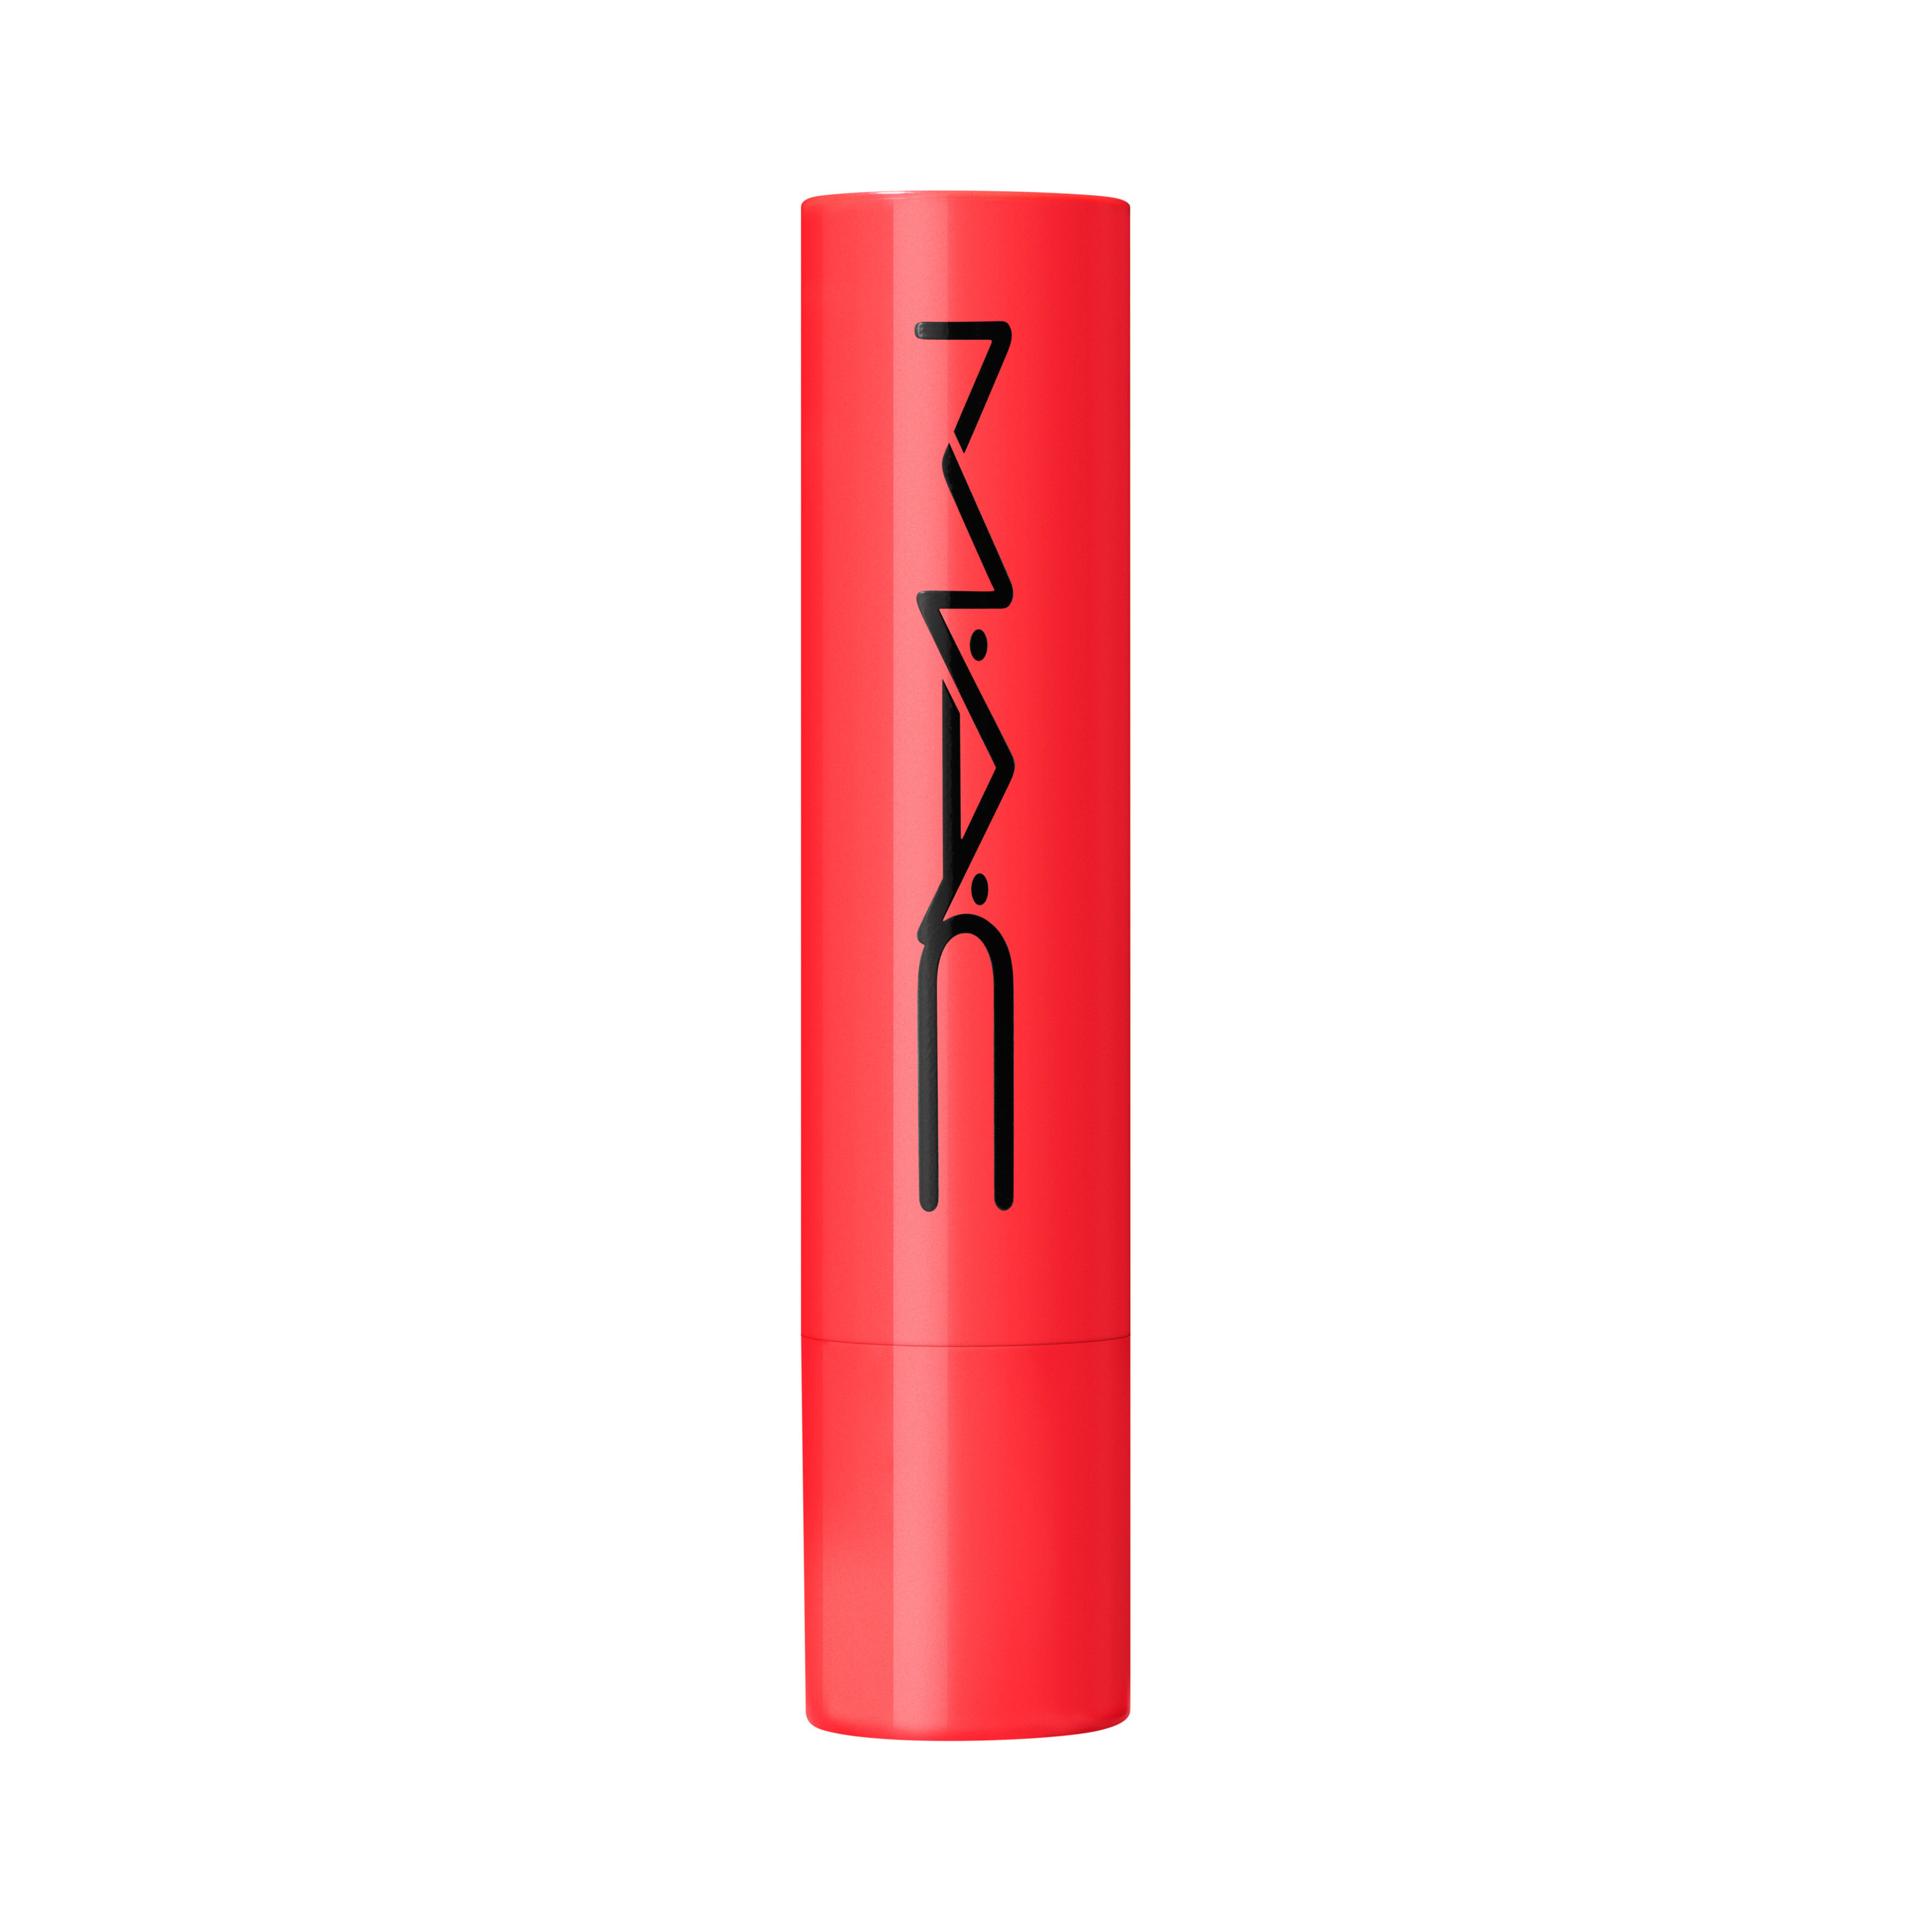 Squirt plumping gloss stick - Heat Sensor, Rosso, large image number 1